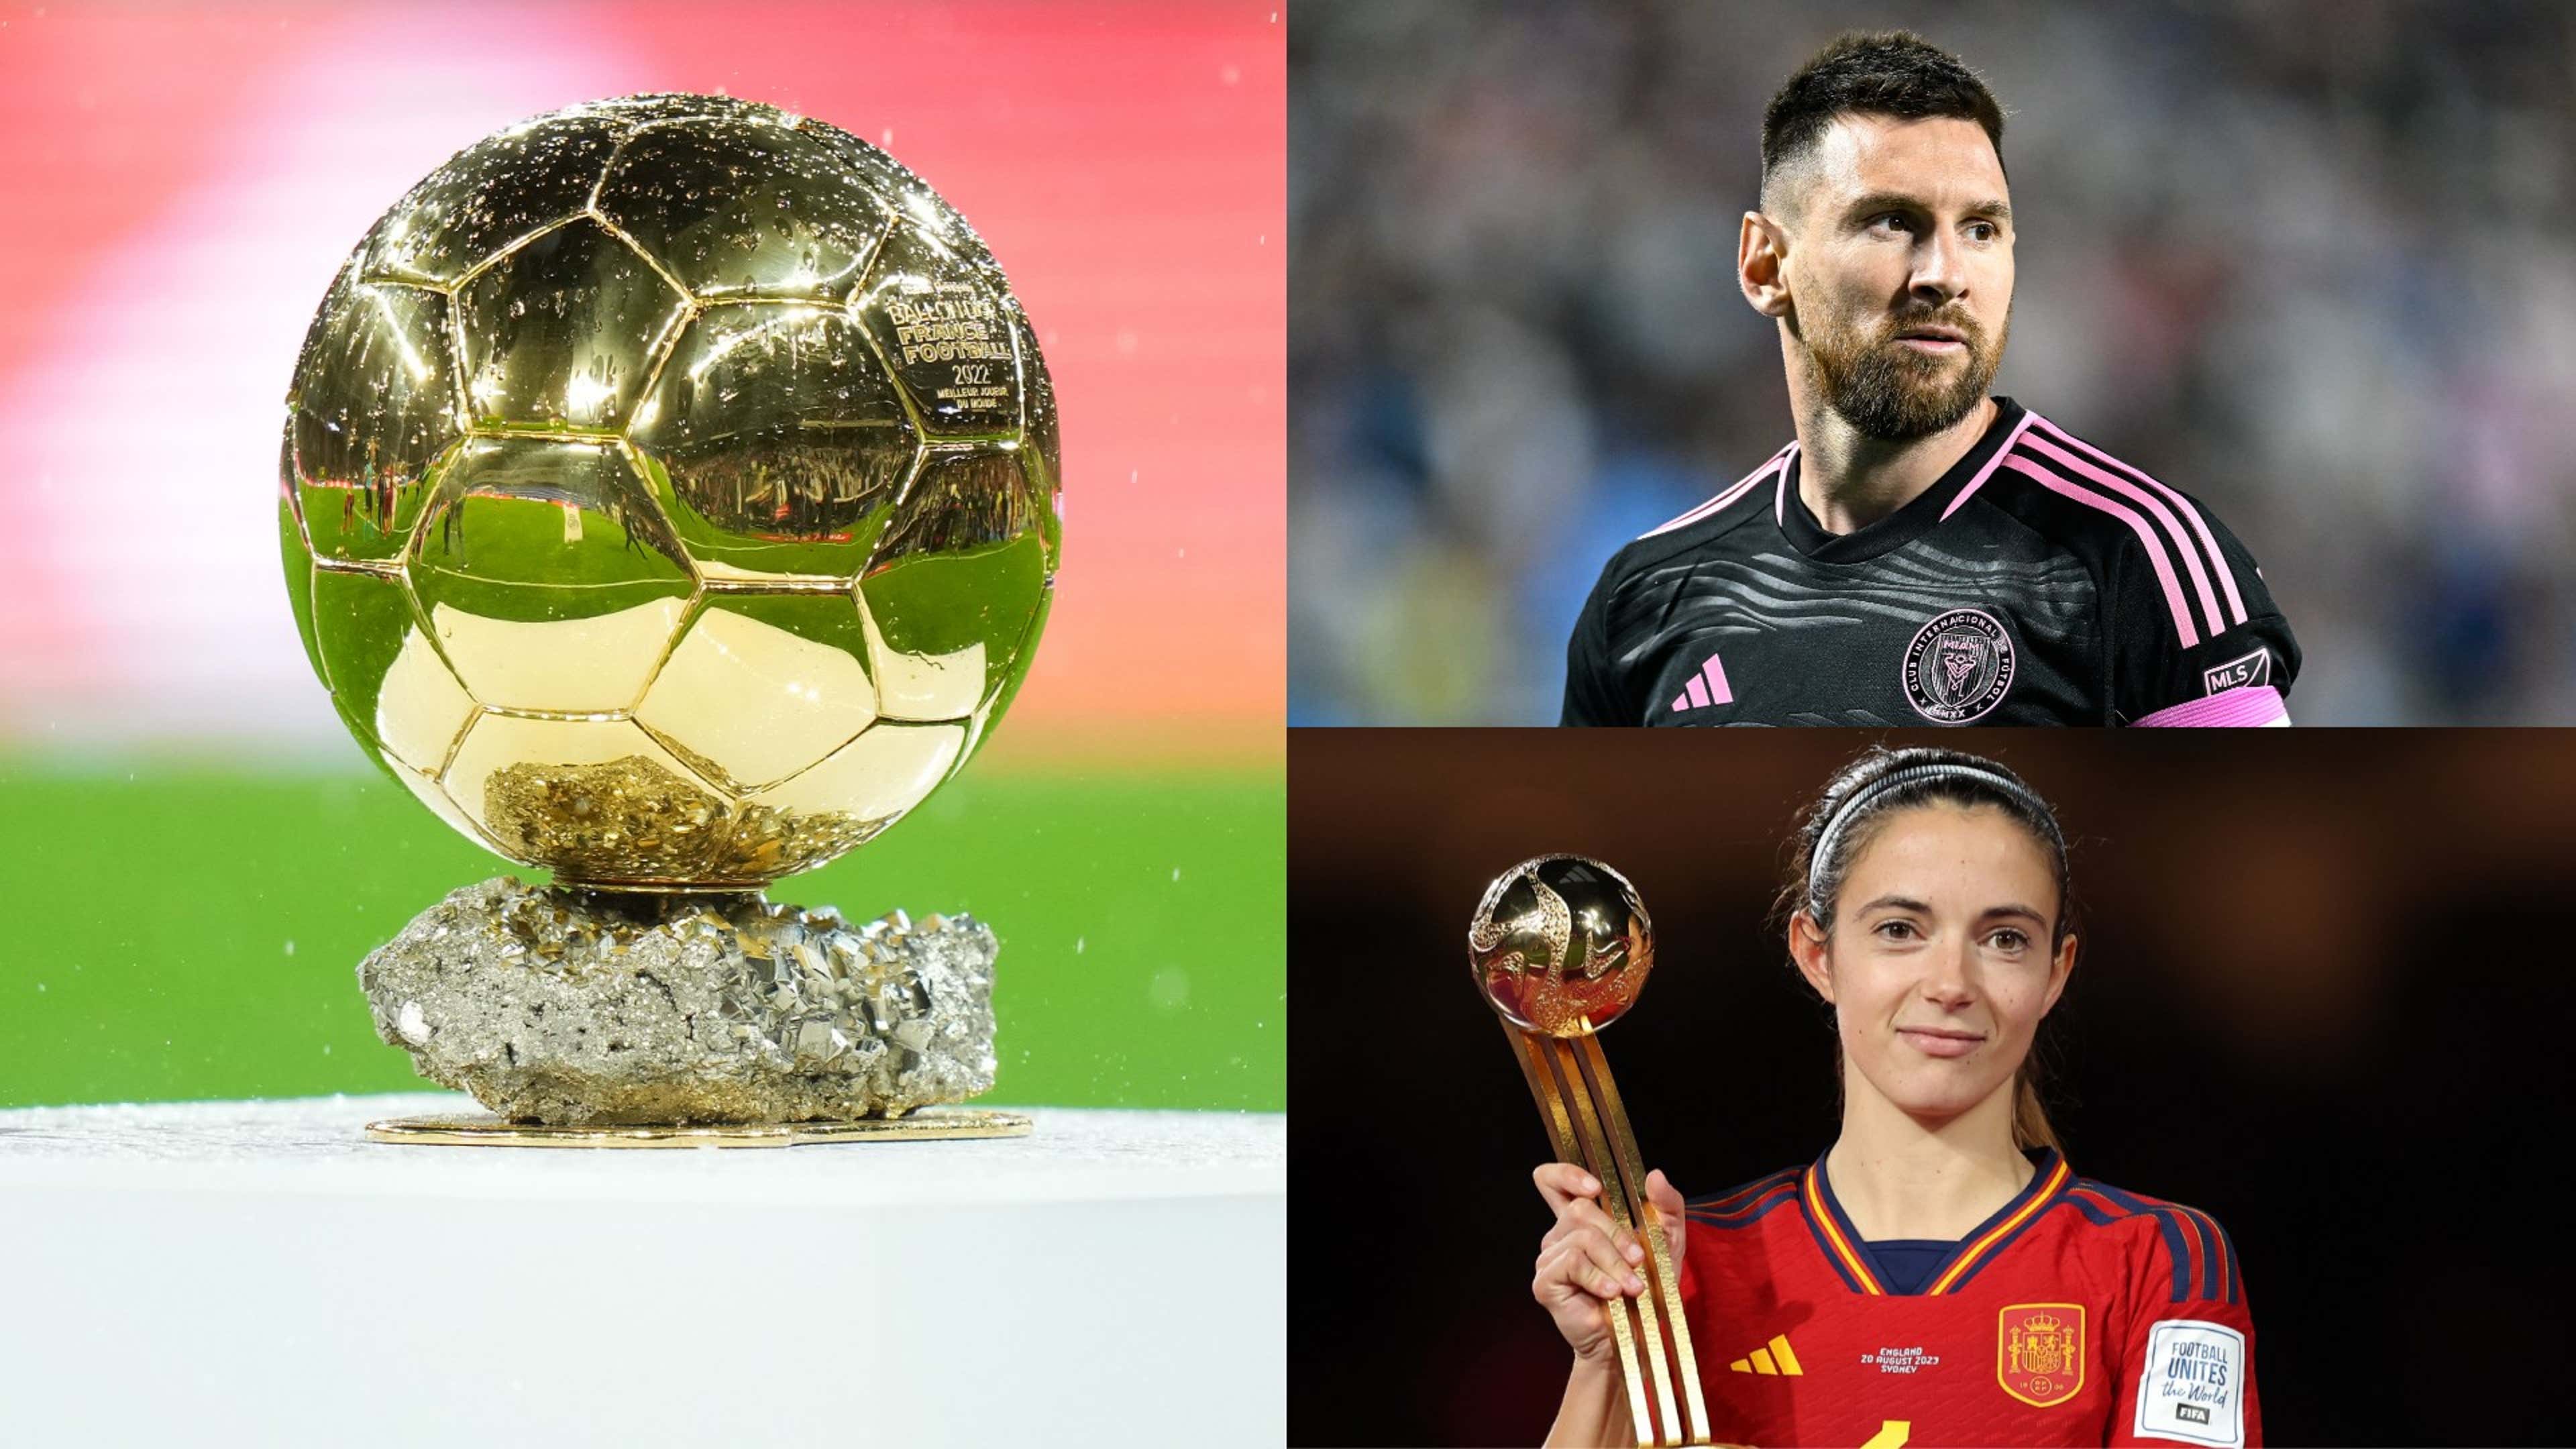 Ballon d'Or 2023: Date, time, nominees, live stream & how to watch